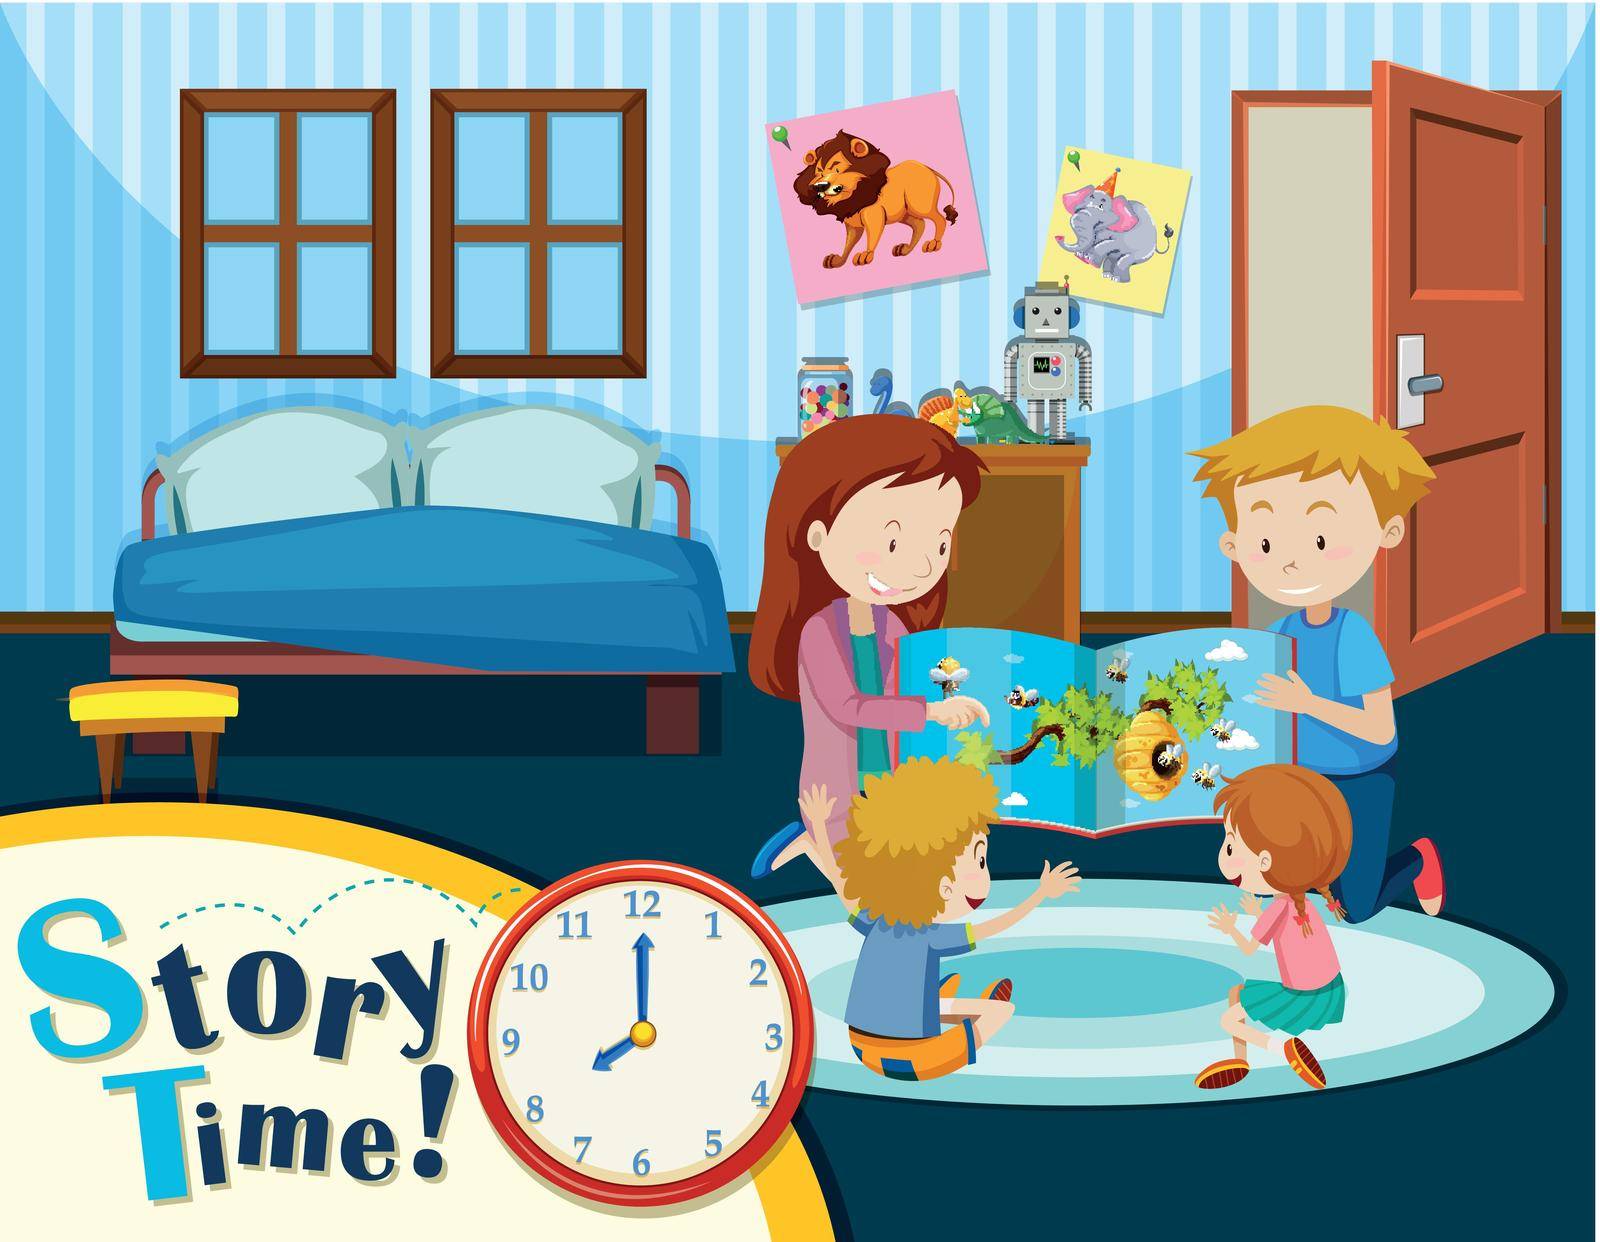 Family story time scene by iimages